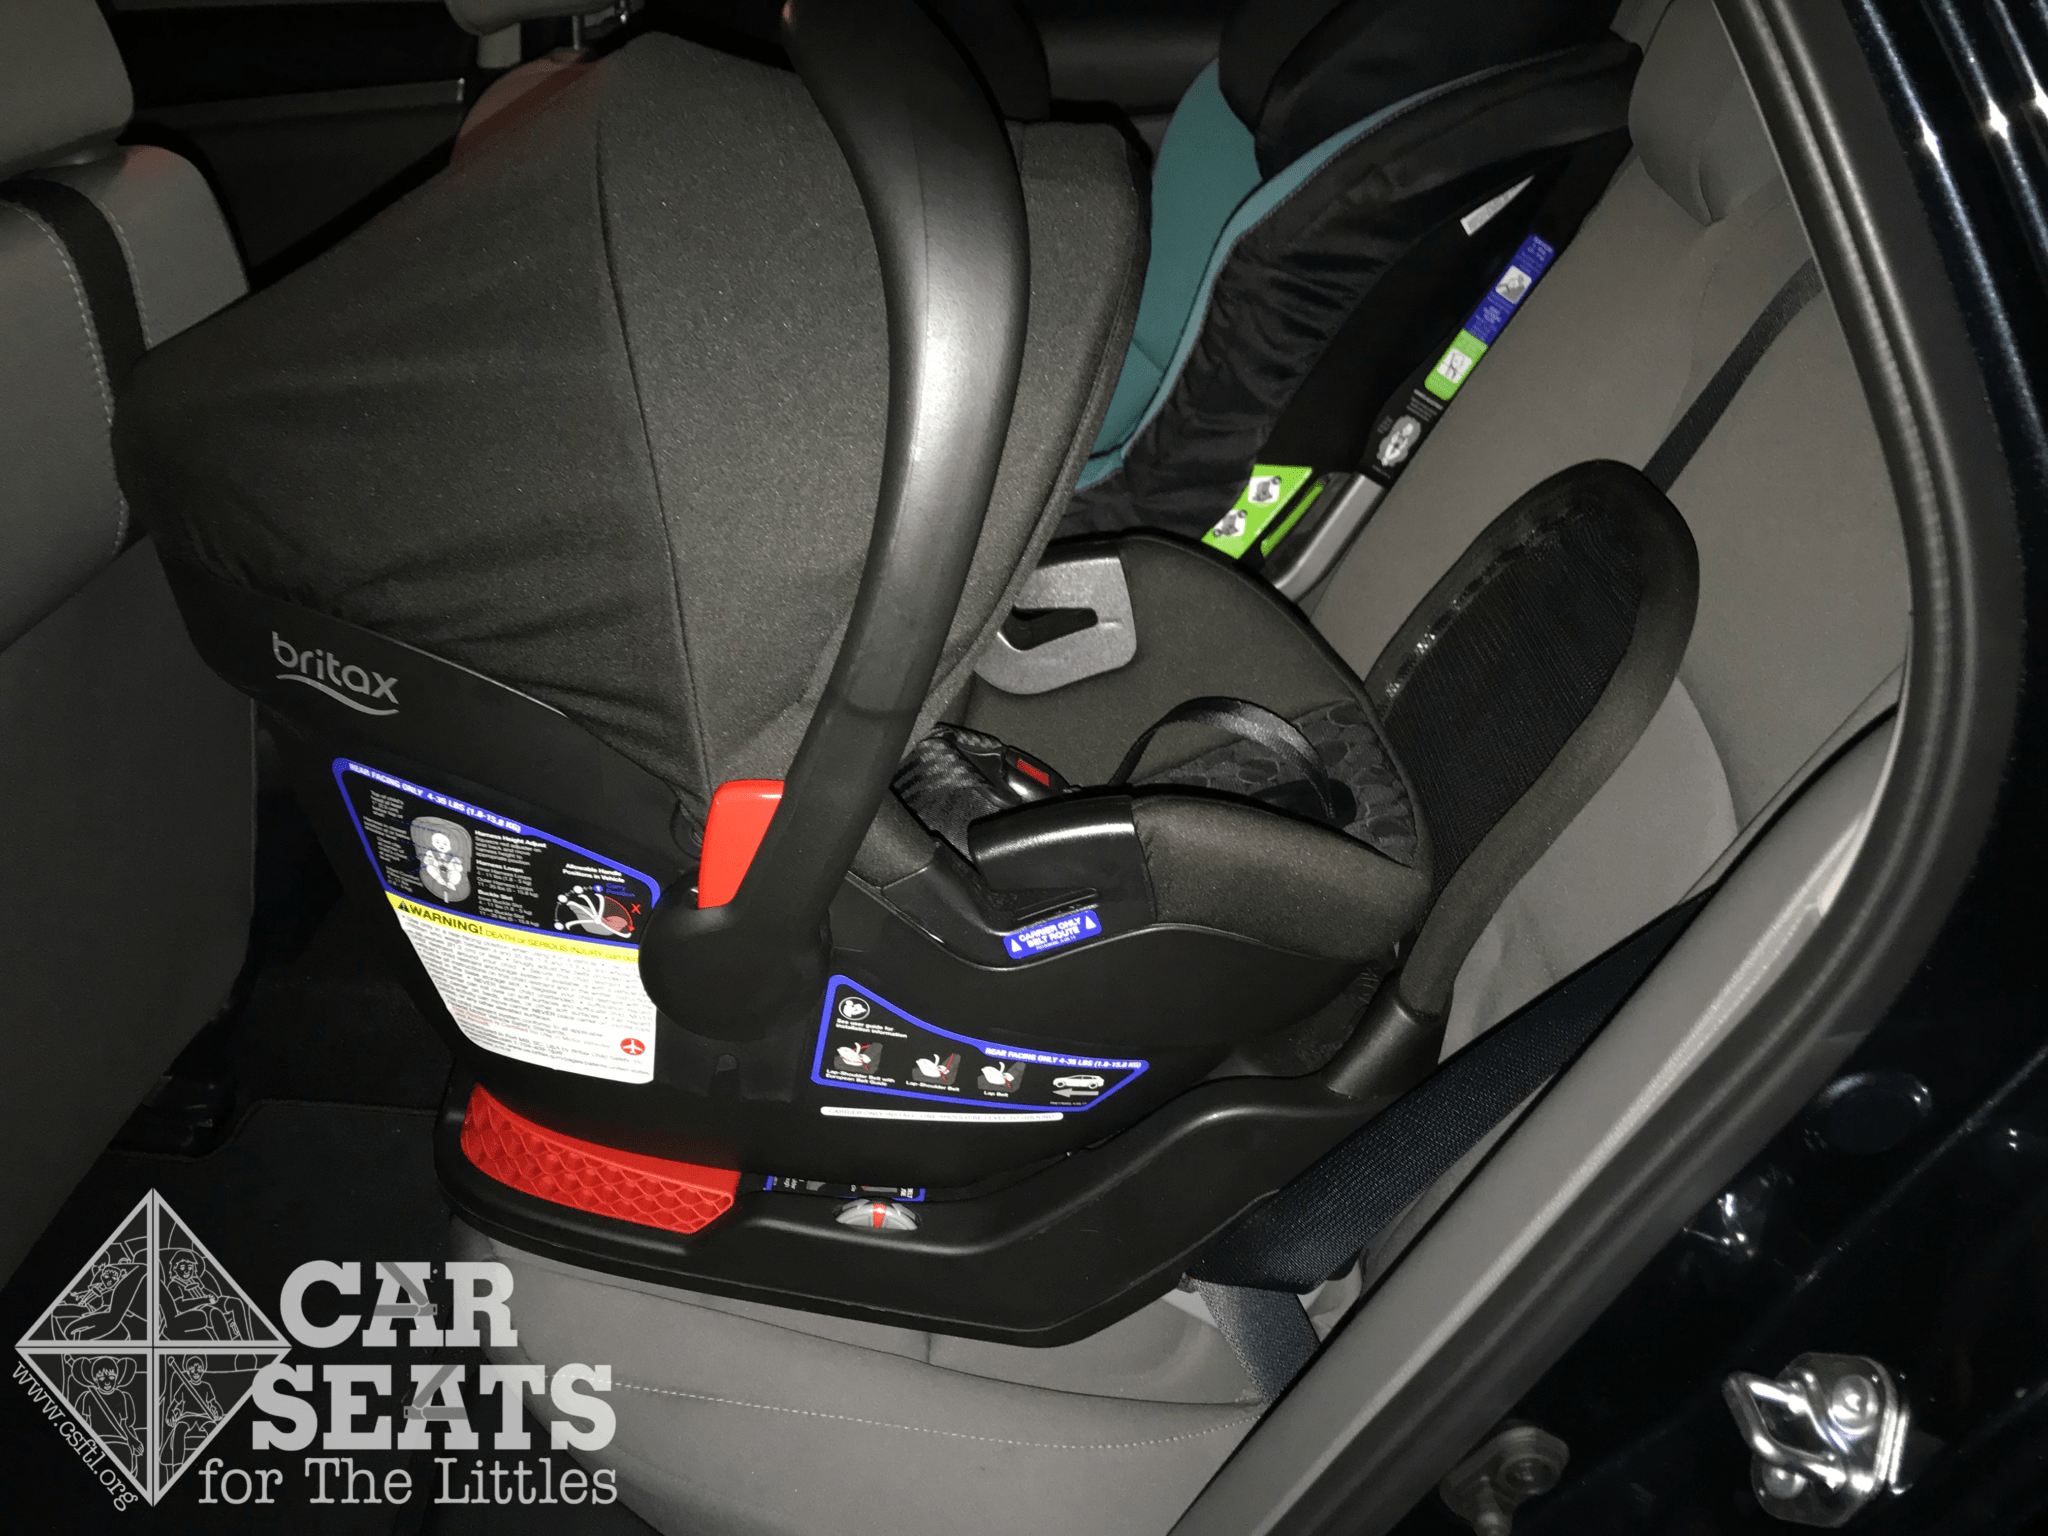 Britax Endeavours Review Car Seats For The Littles - Britax Car Seat Base Used